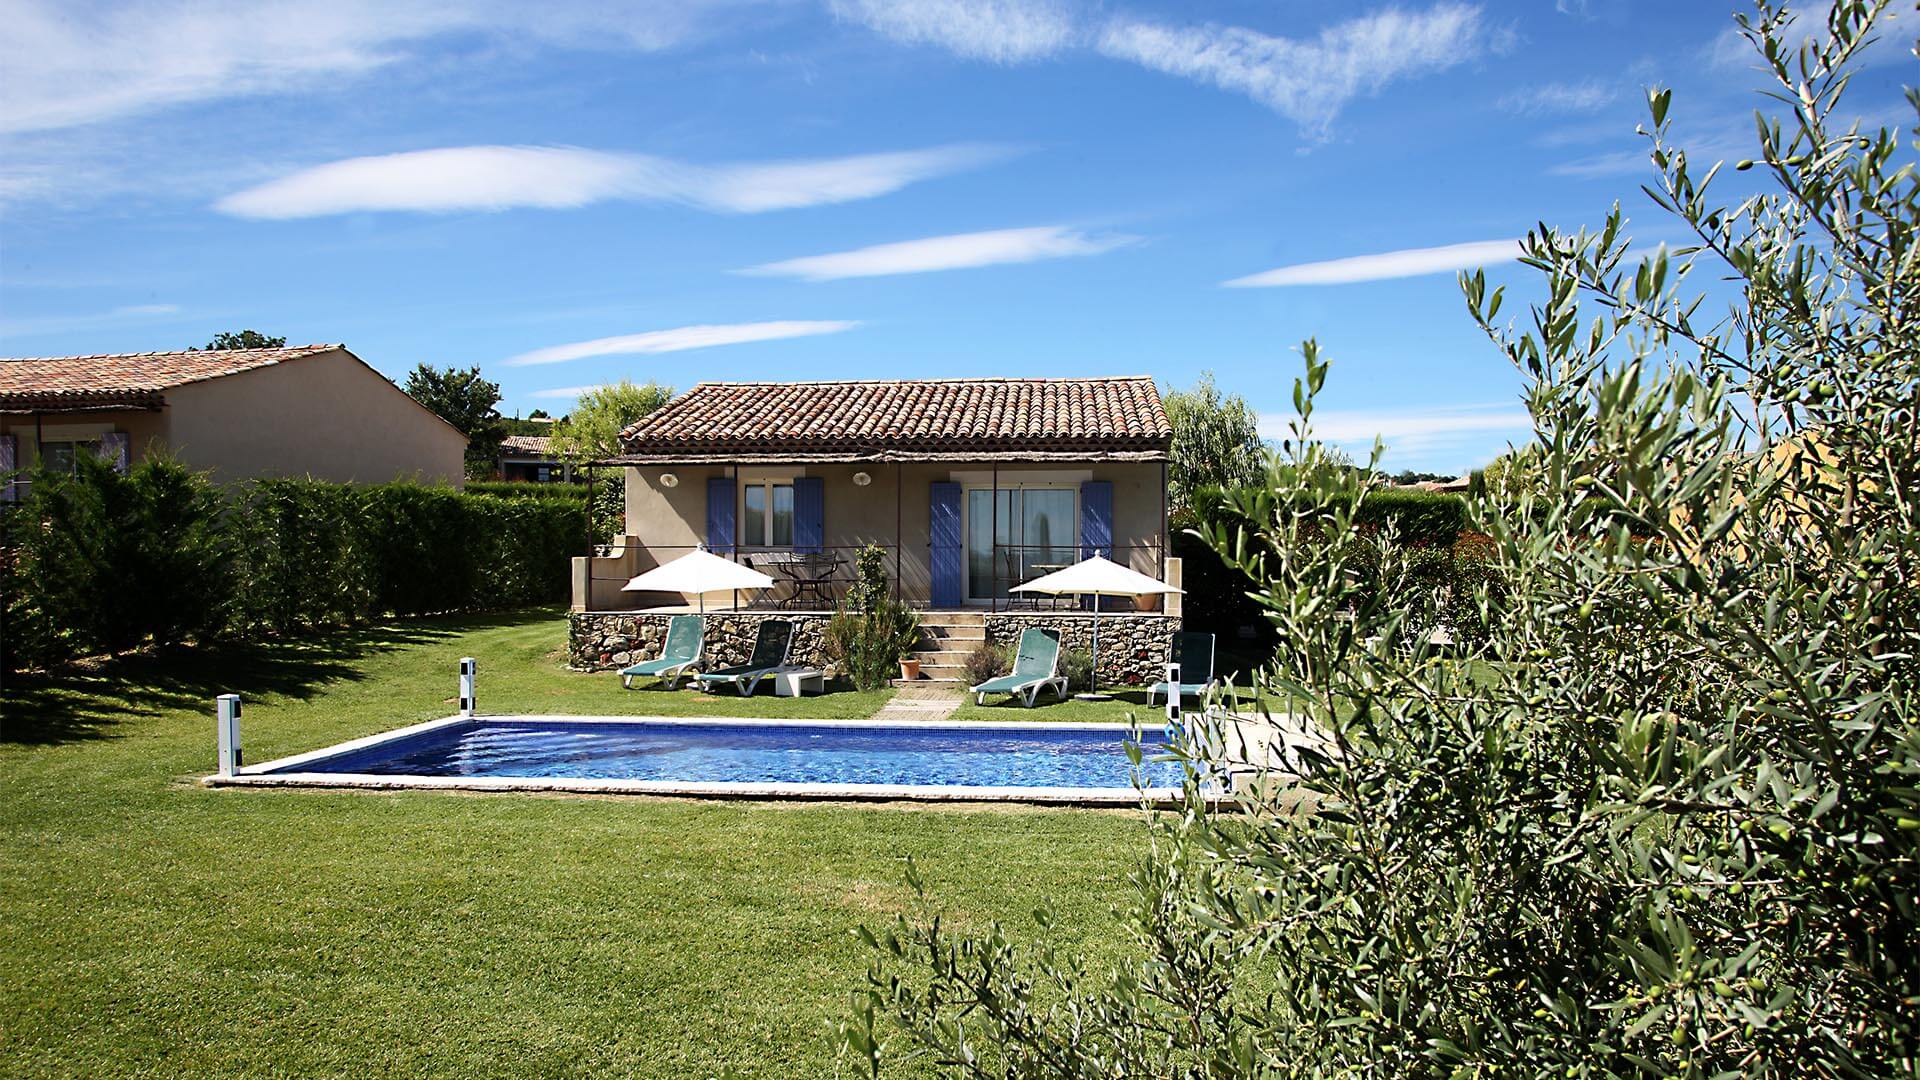 Holiday rental 2 bedroom villa in Provence Alpes Côte d'Azur | Villa terre d'ombre | Private garden and swimming pool